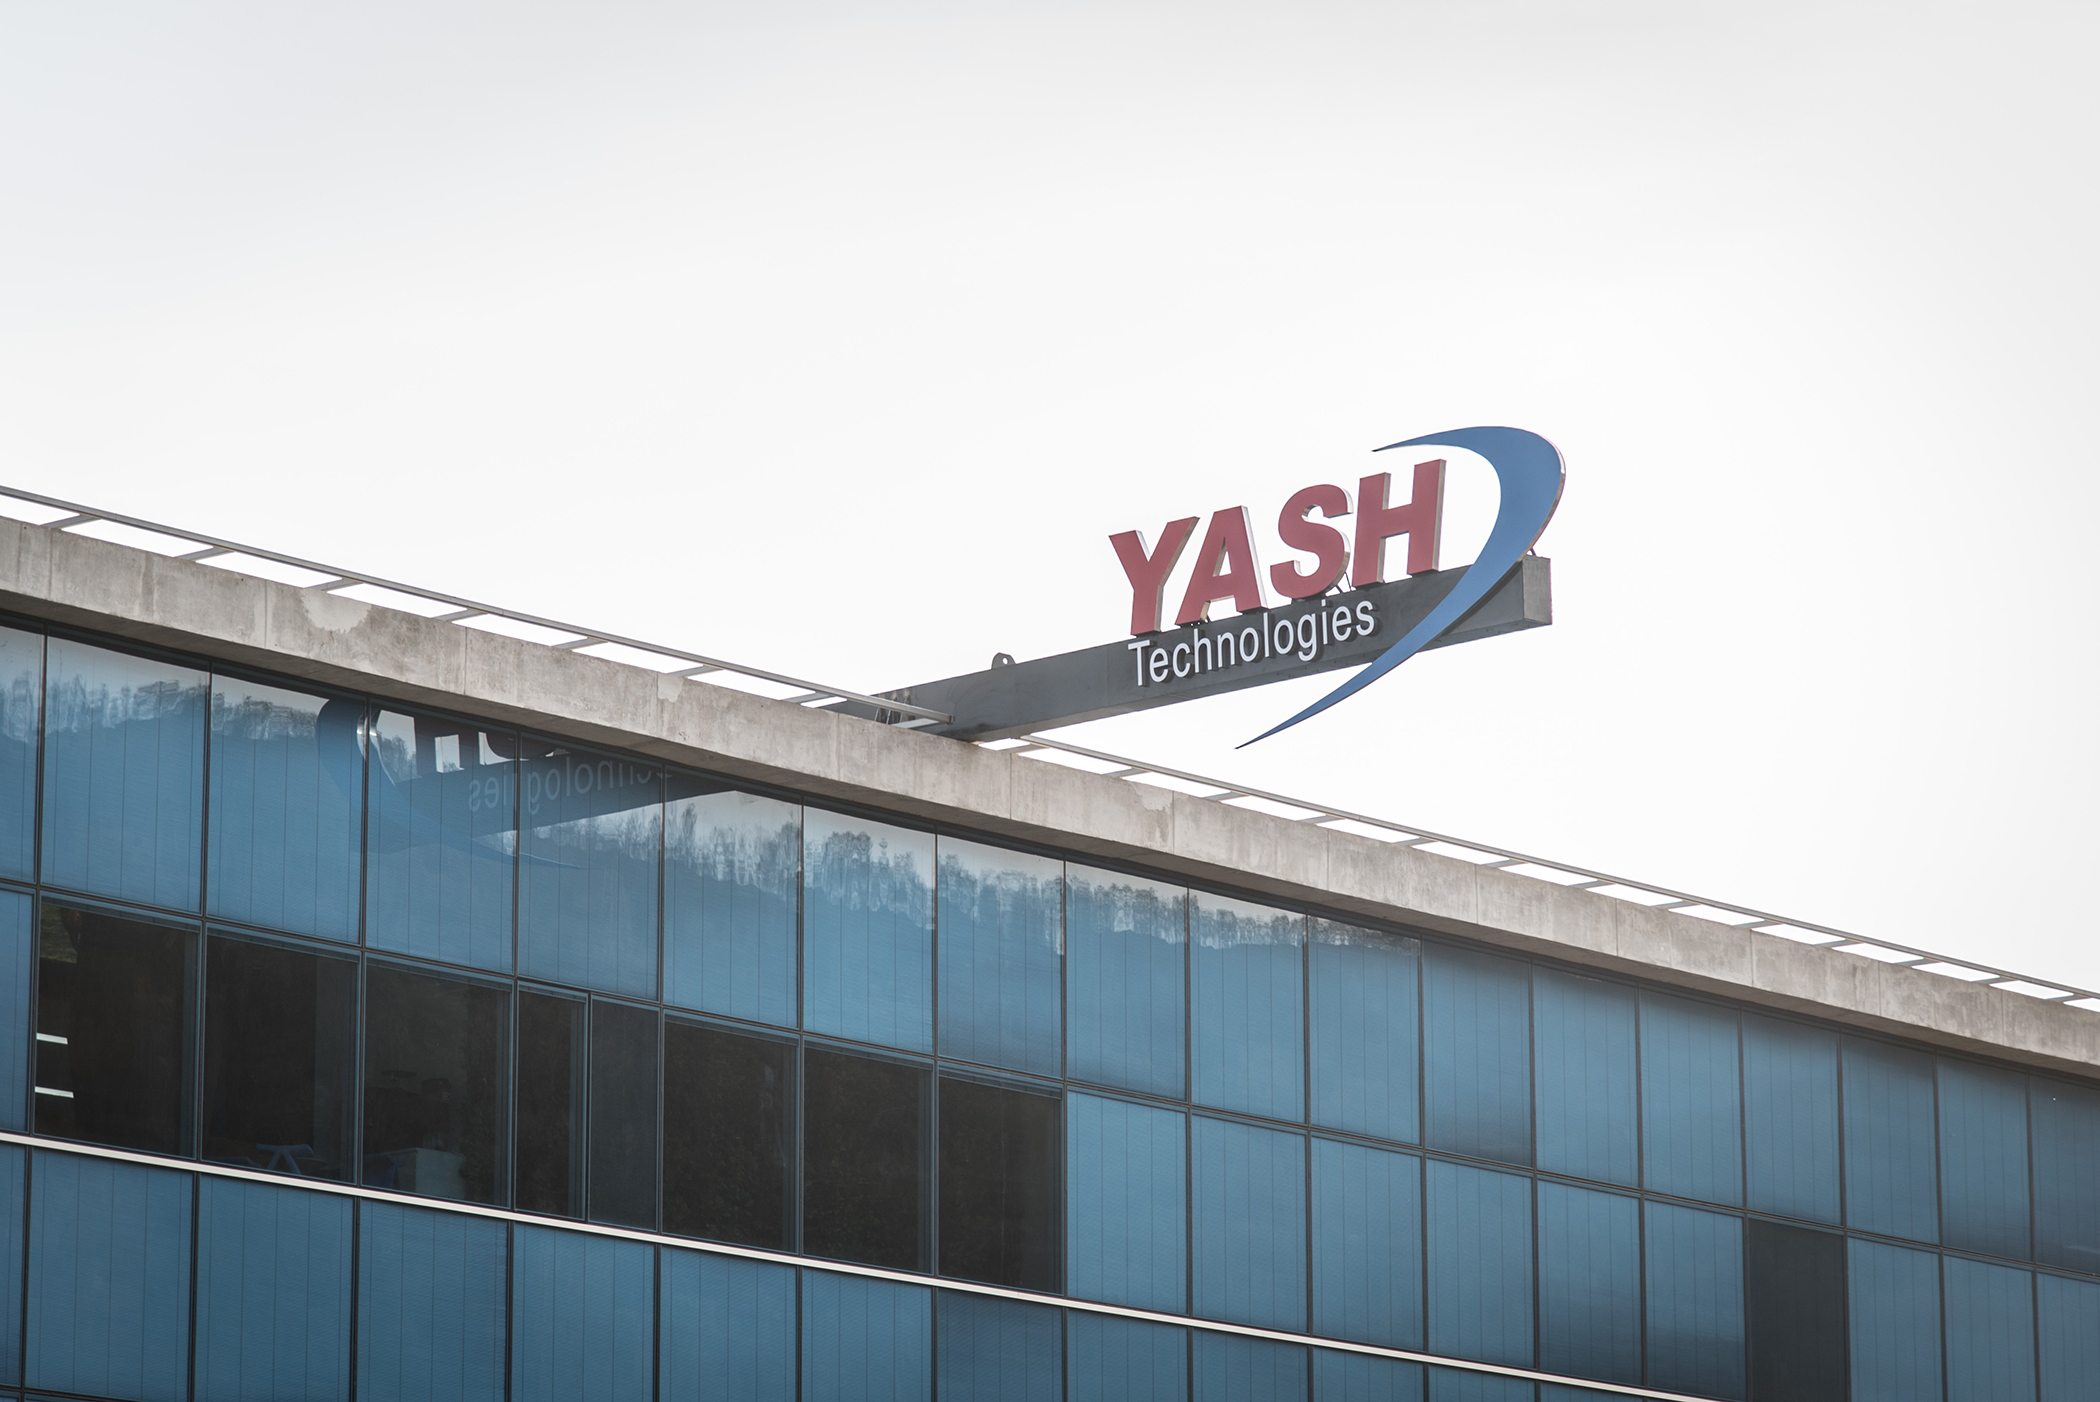 YASH Technologies New Office Addition to the Middle East